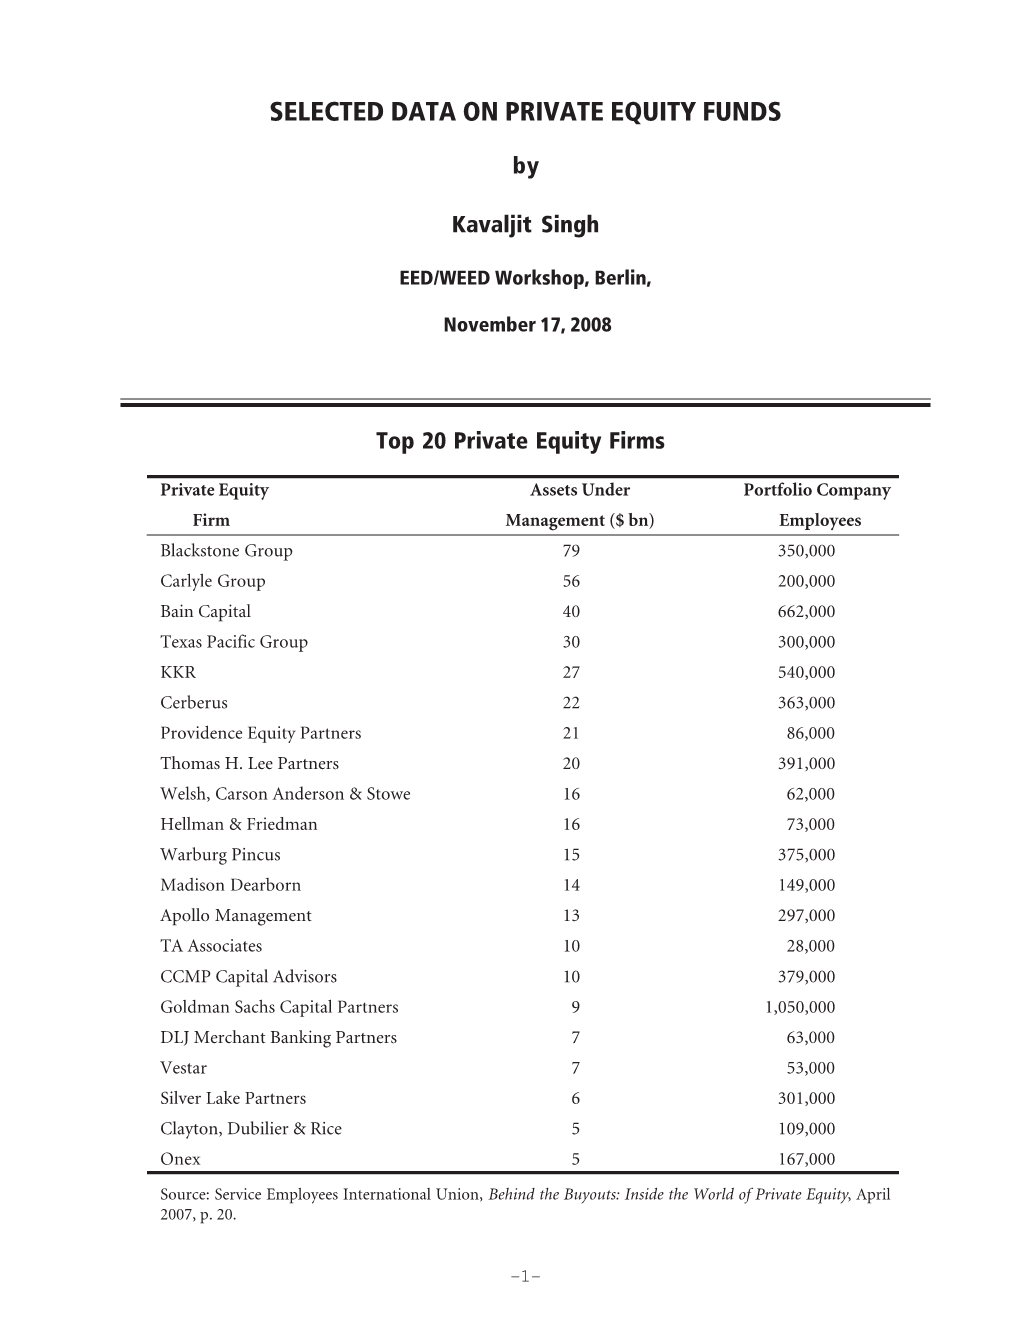 Selected Data Notes on Private Equity, November 2008.Pmd